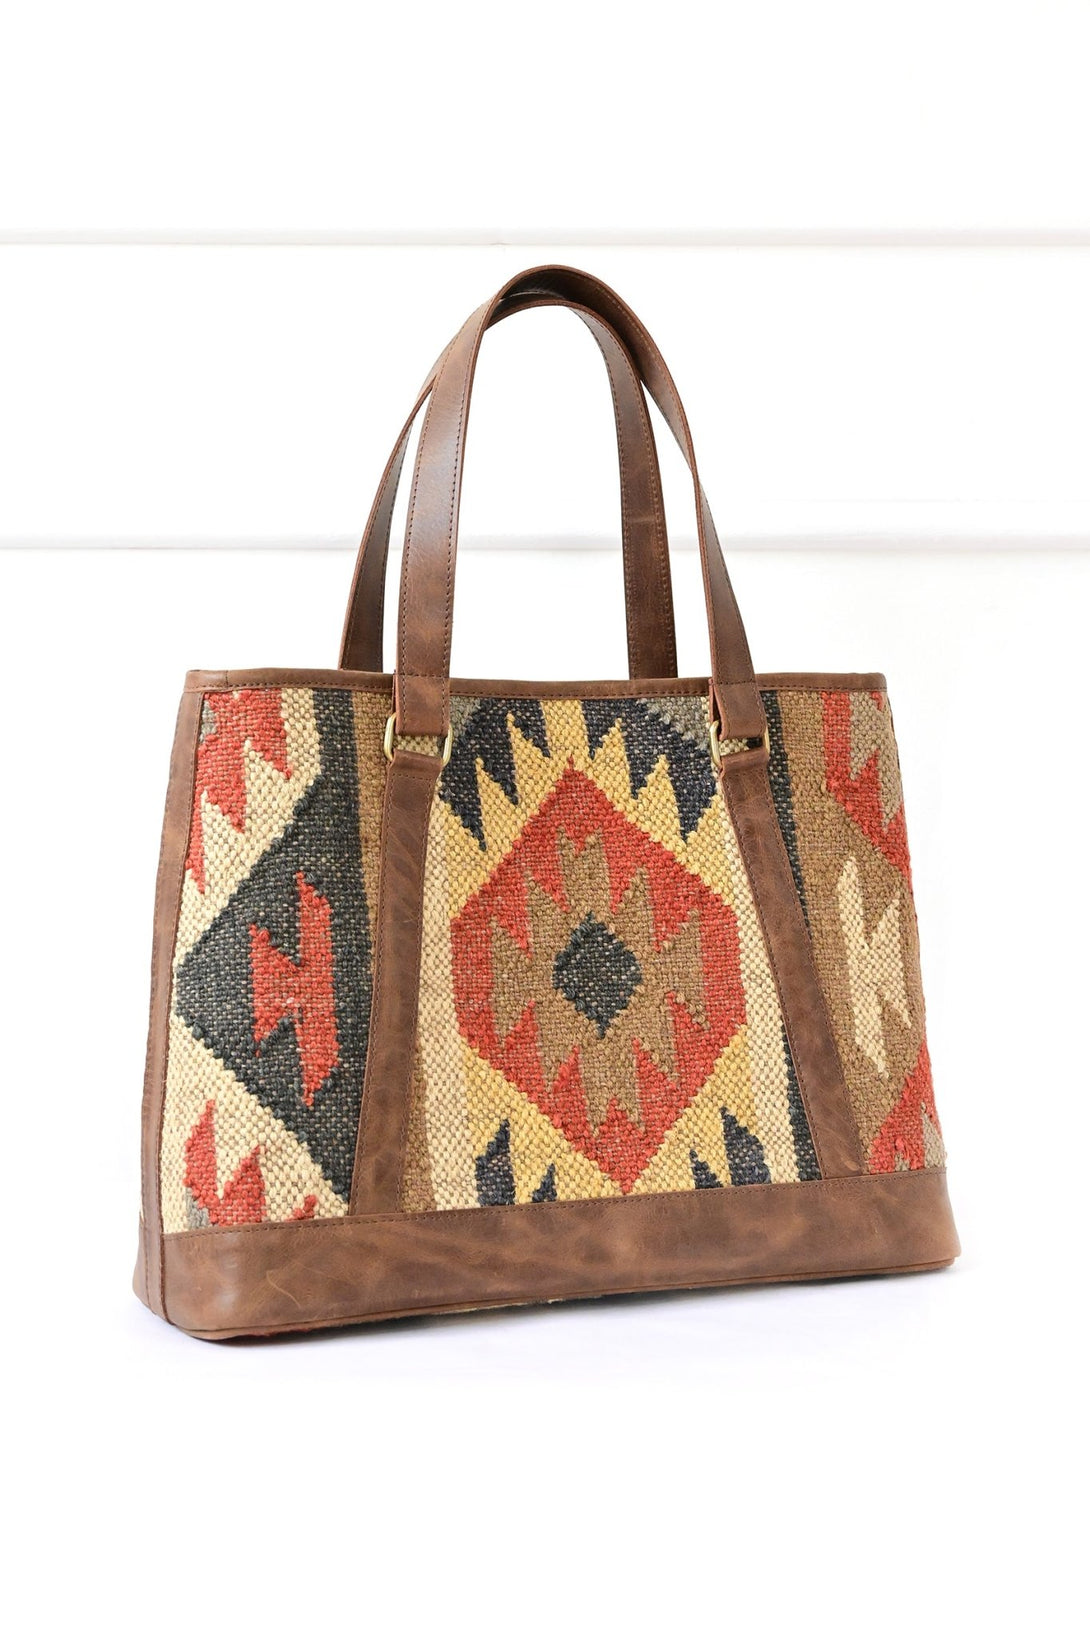 NYMPH - LEATHER AND KILIM BAG - ART AVENUE